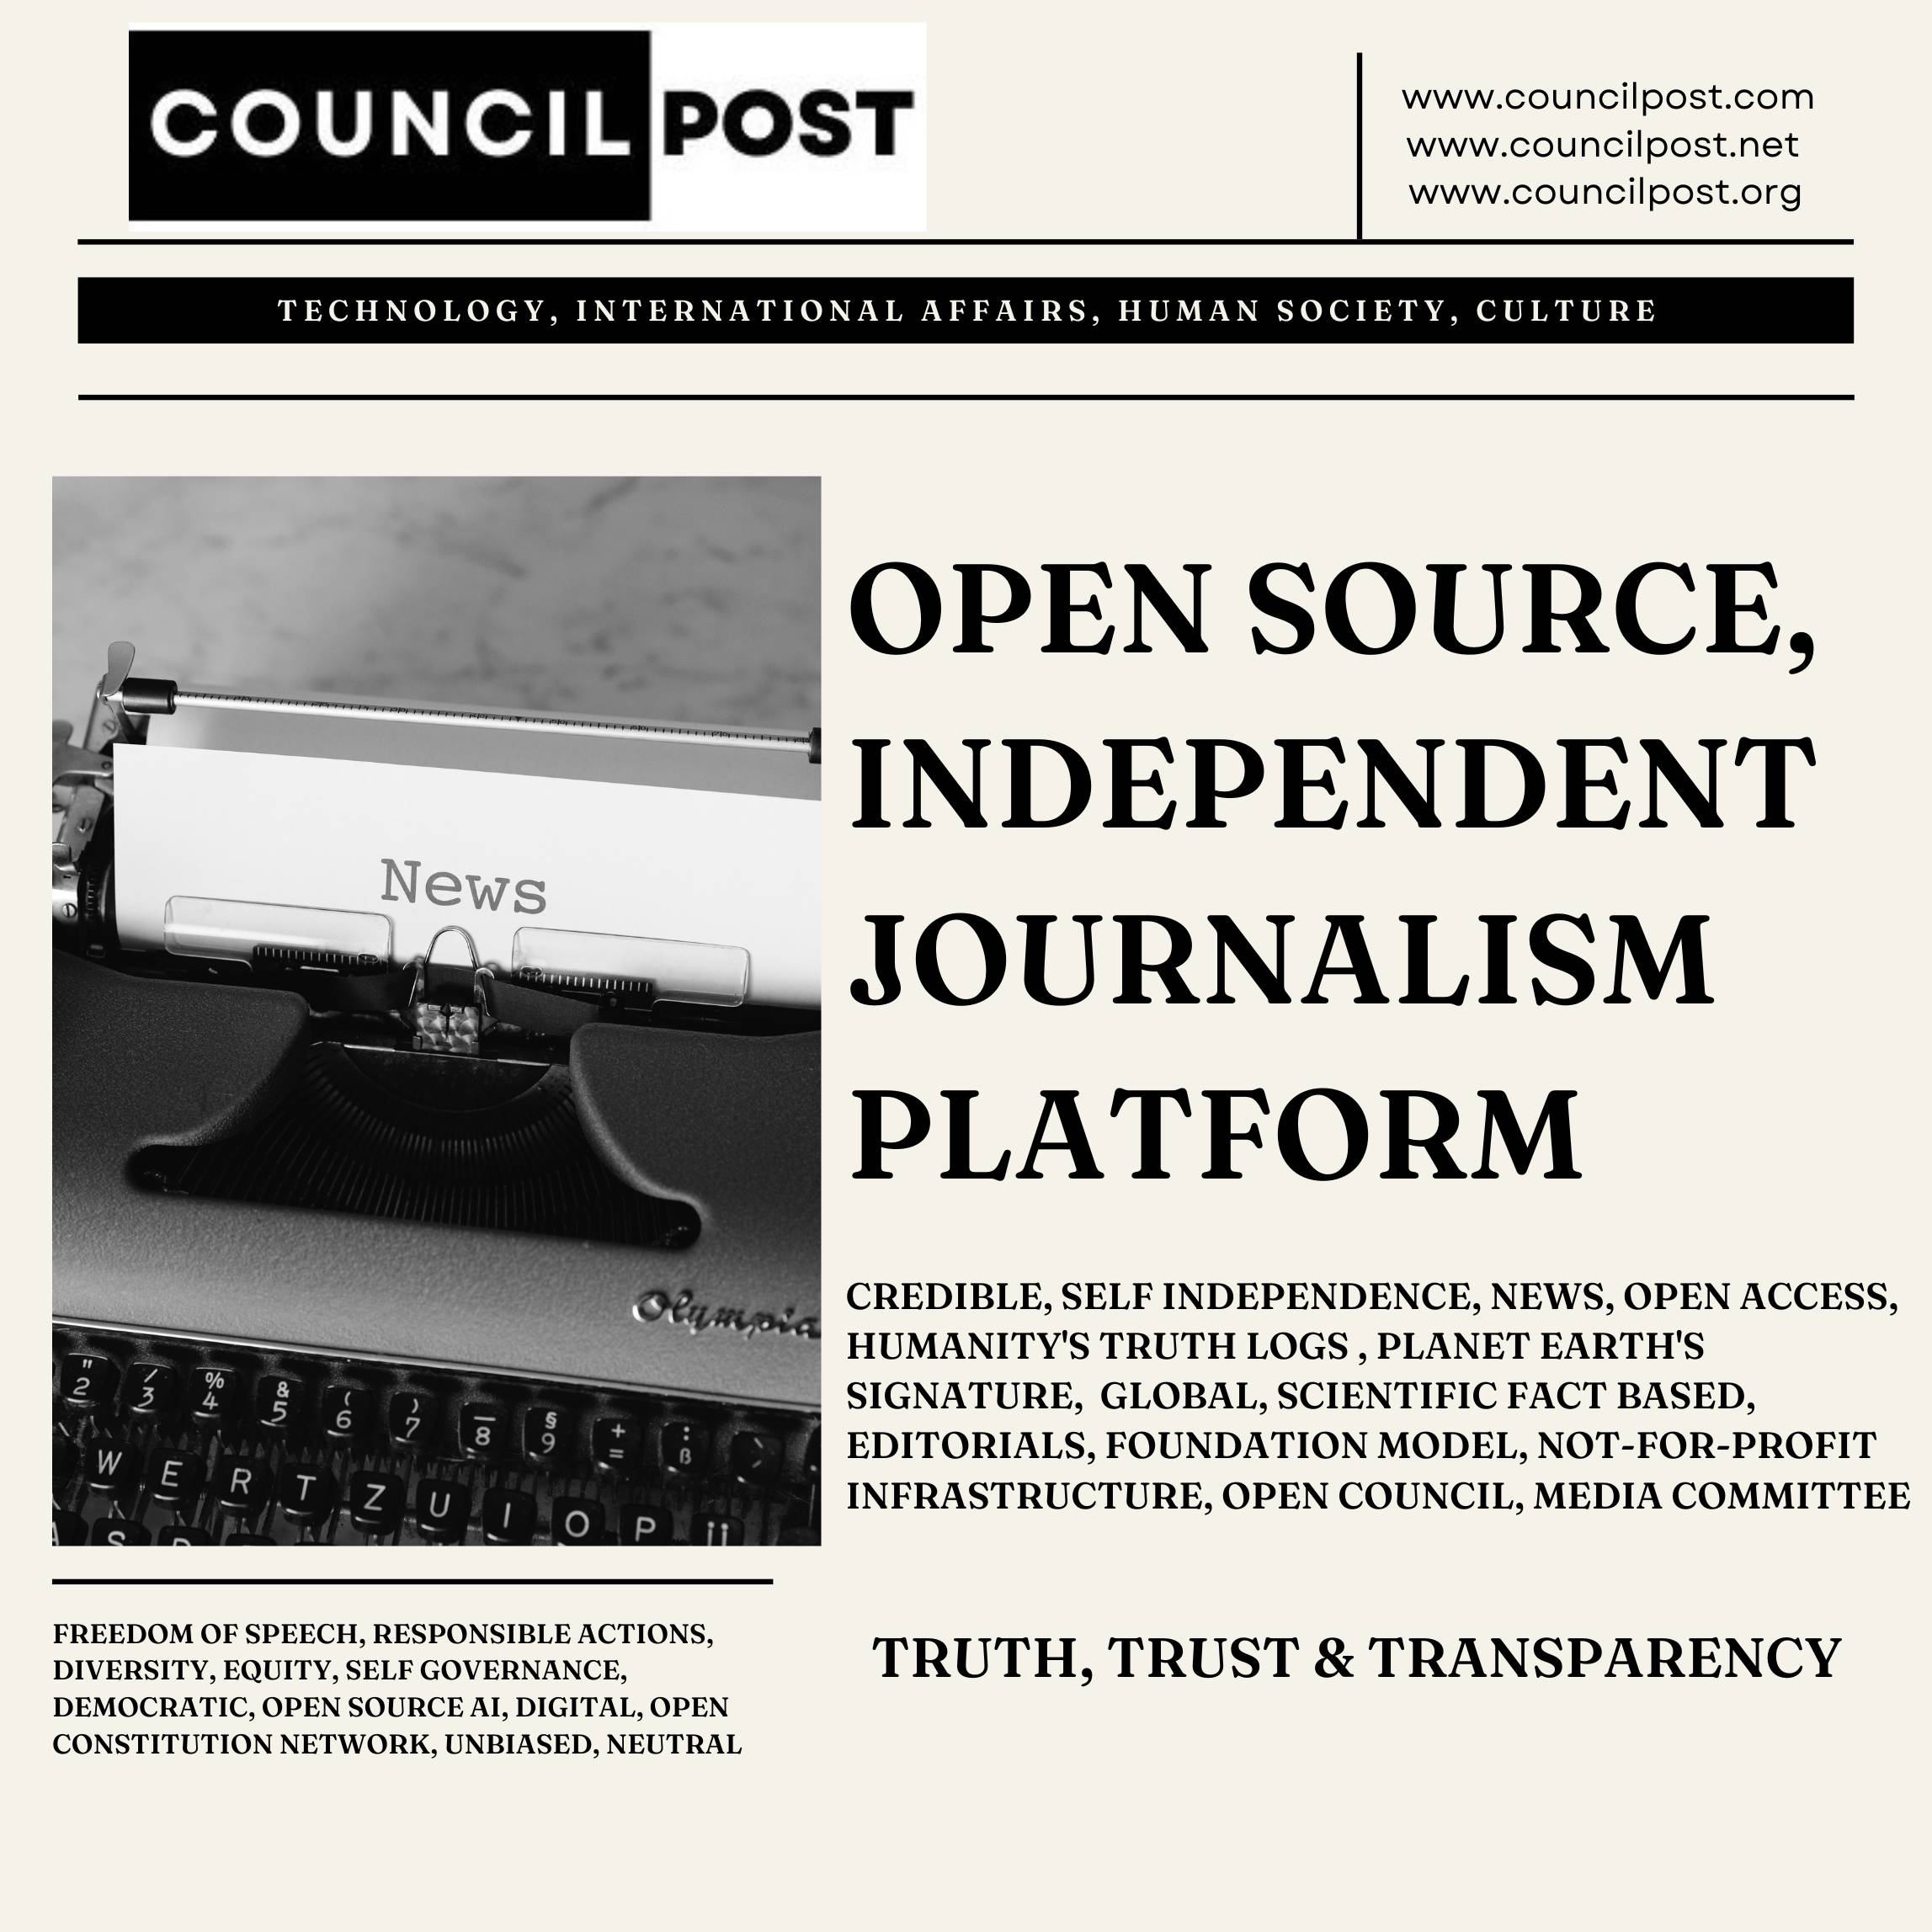 Council Post, an independent media platform, powered by open source AI